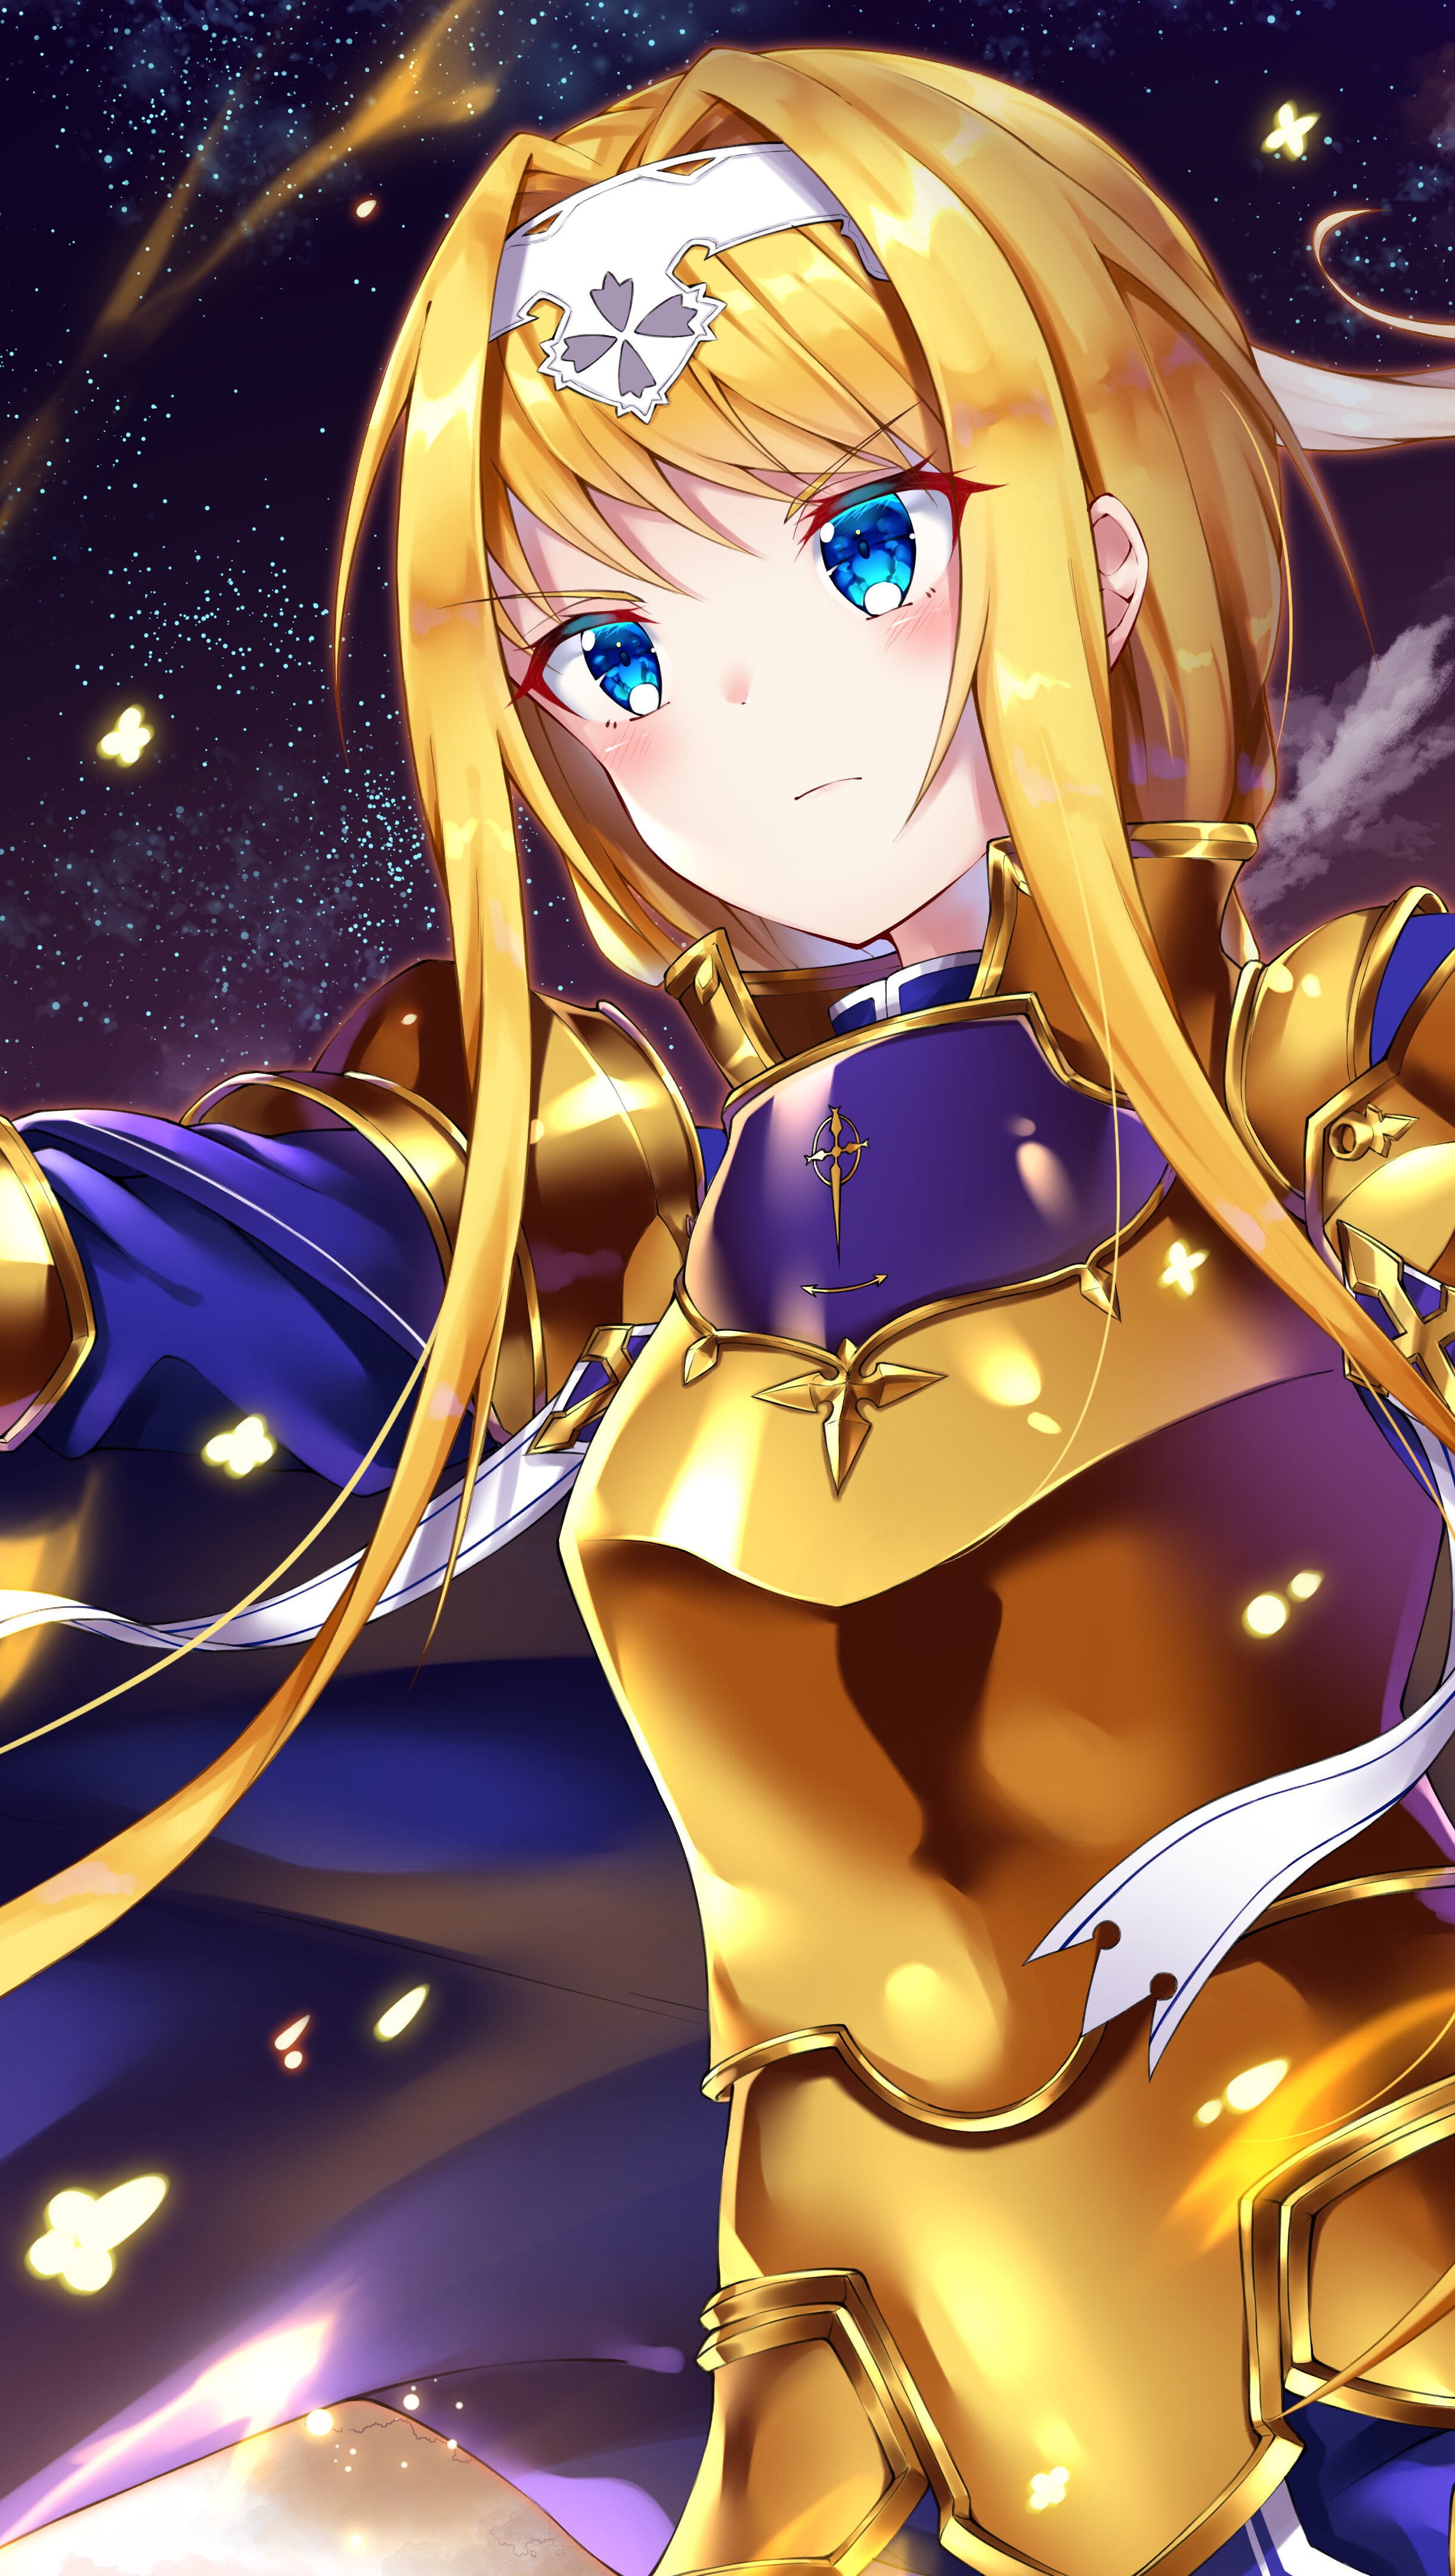 Alice Sao with sword from Alicization Anime Wallpaper 8k Ultra HD ID:4390